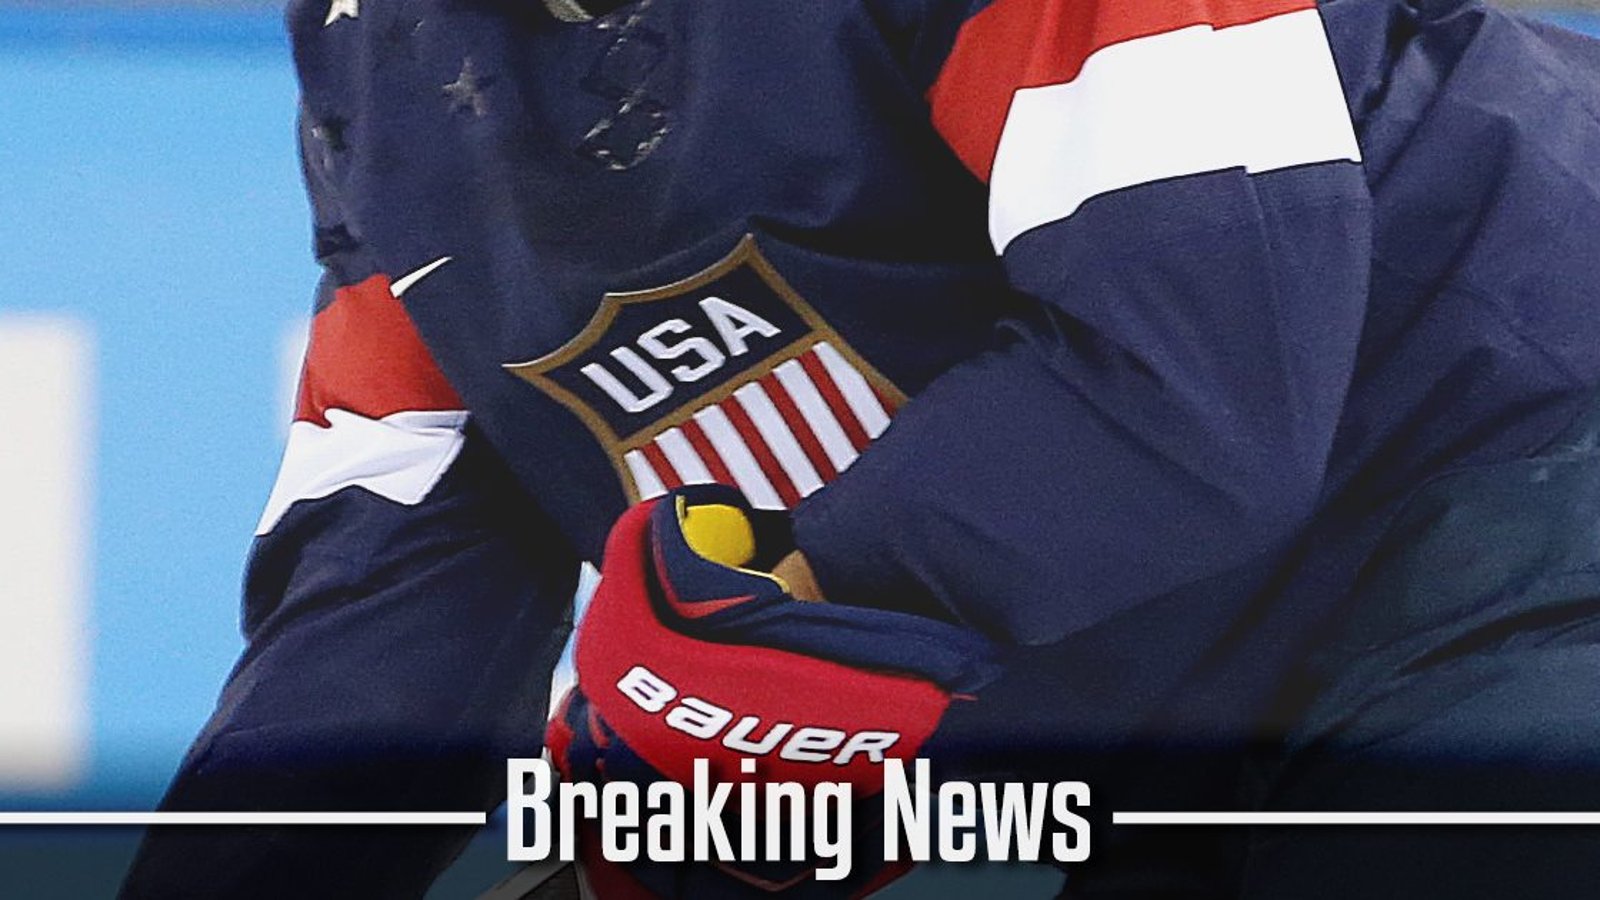 BREAKING: Team USA's World Championship roster just got a huge boost on Defense!